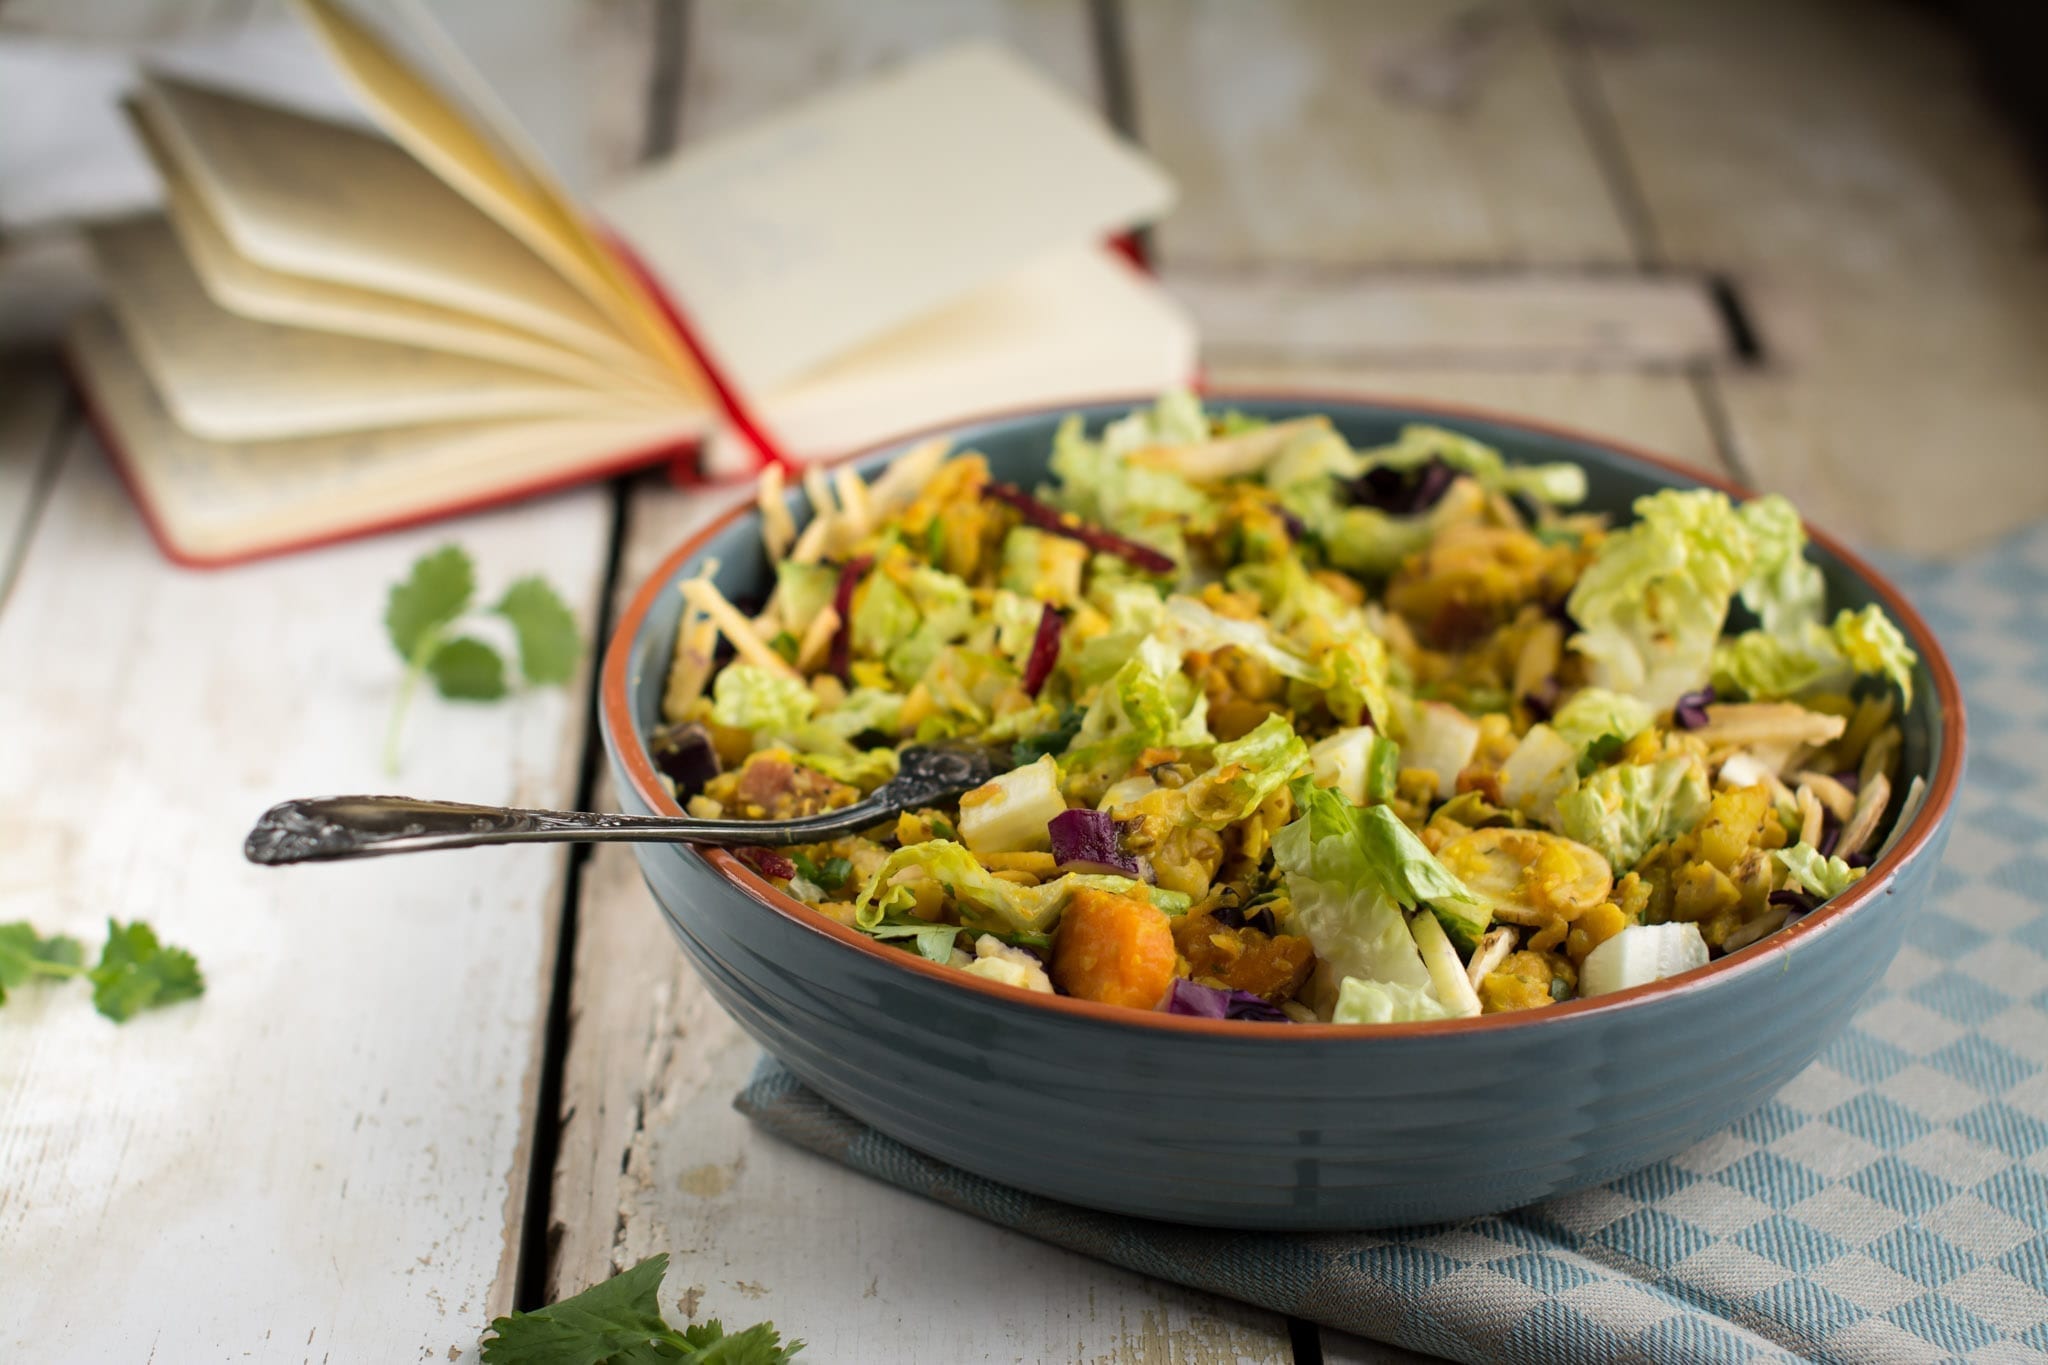 Salad with Chickpea Dhal